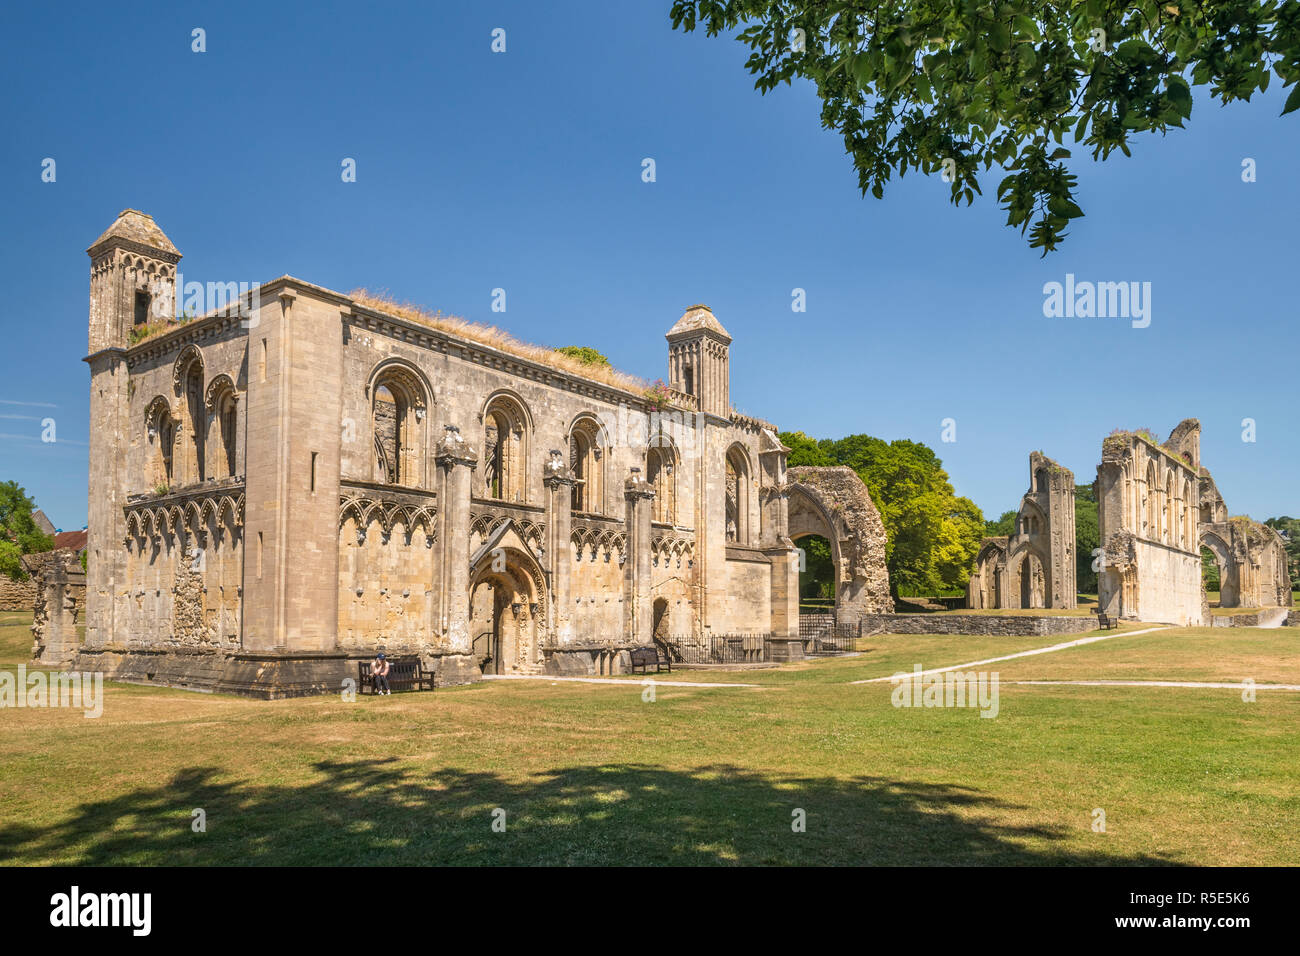 The ancient remains of the Lady Chapel at Glastonbury Abbey in Somerset, England. Stock Photo